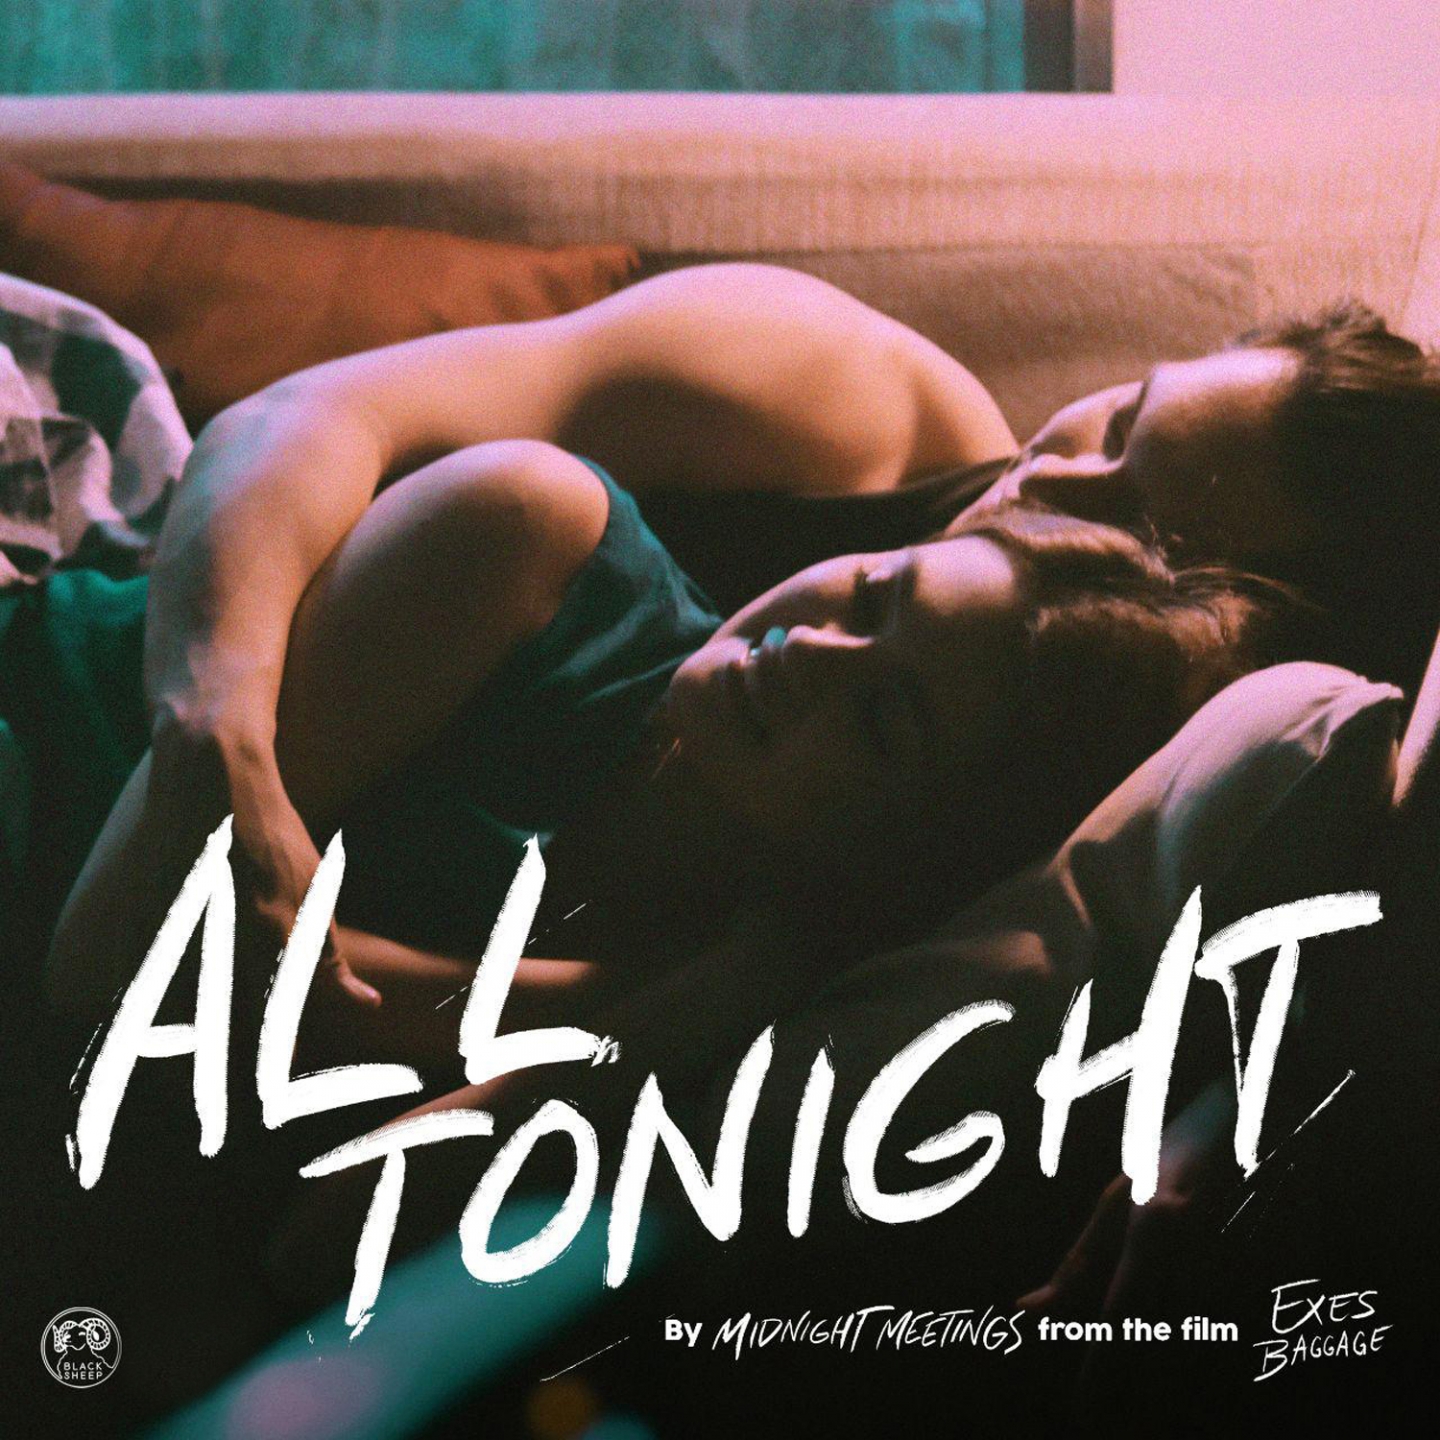 All Tonight (From "Exes Baggage")